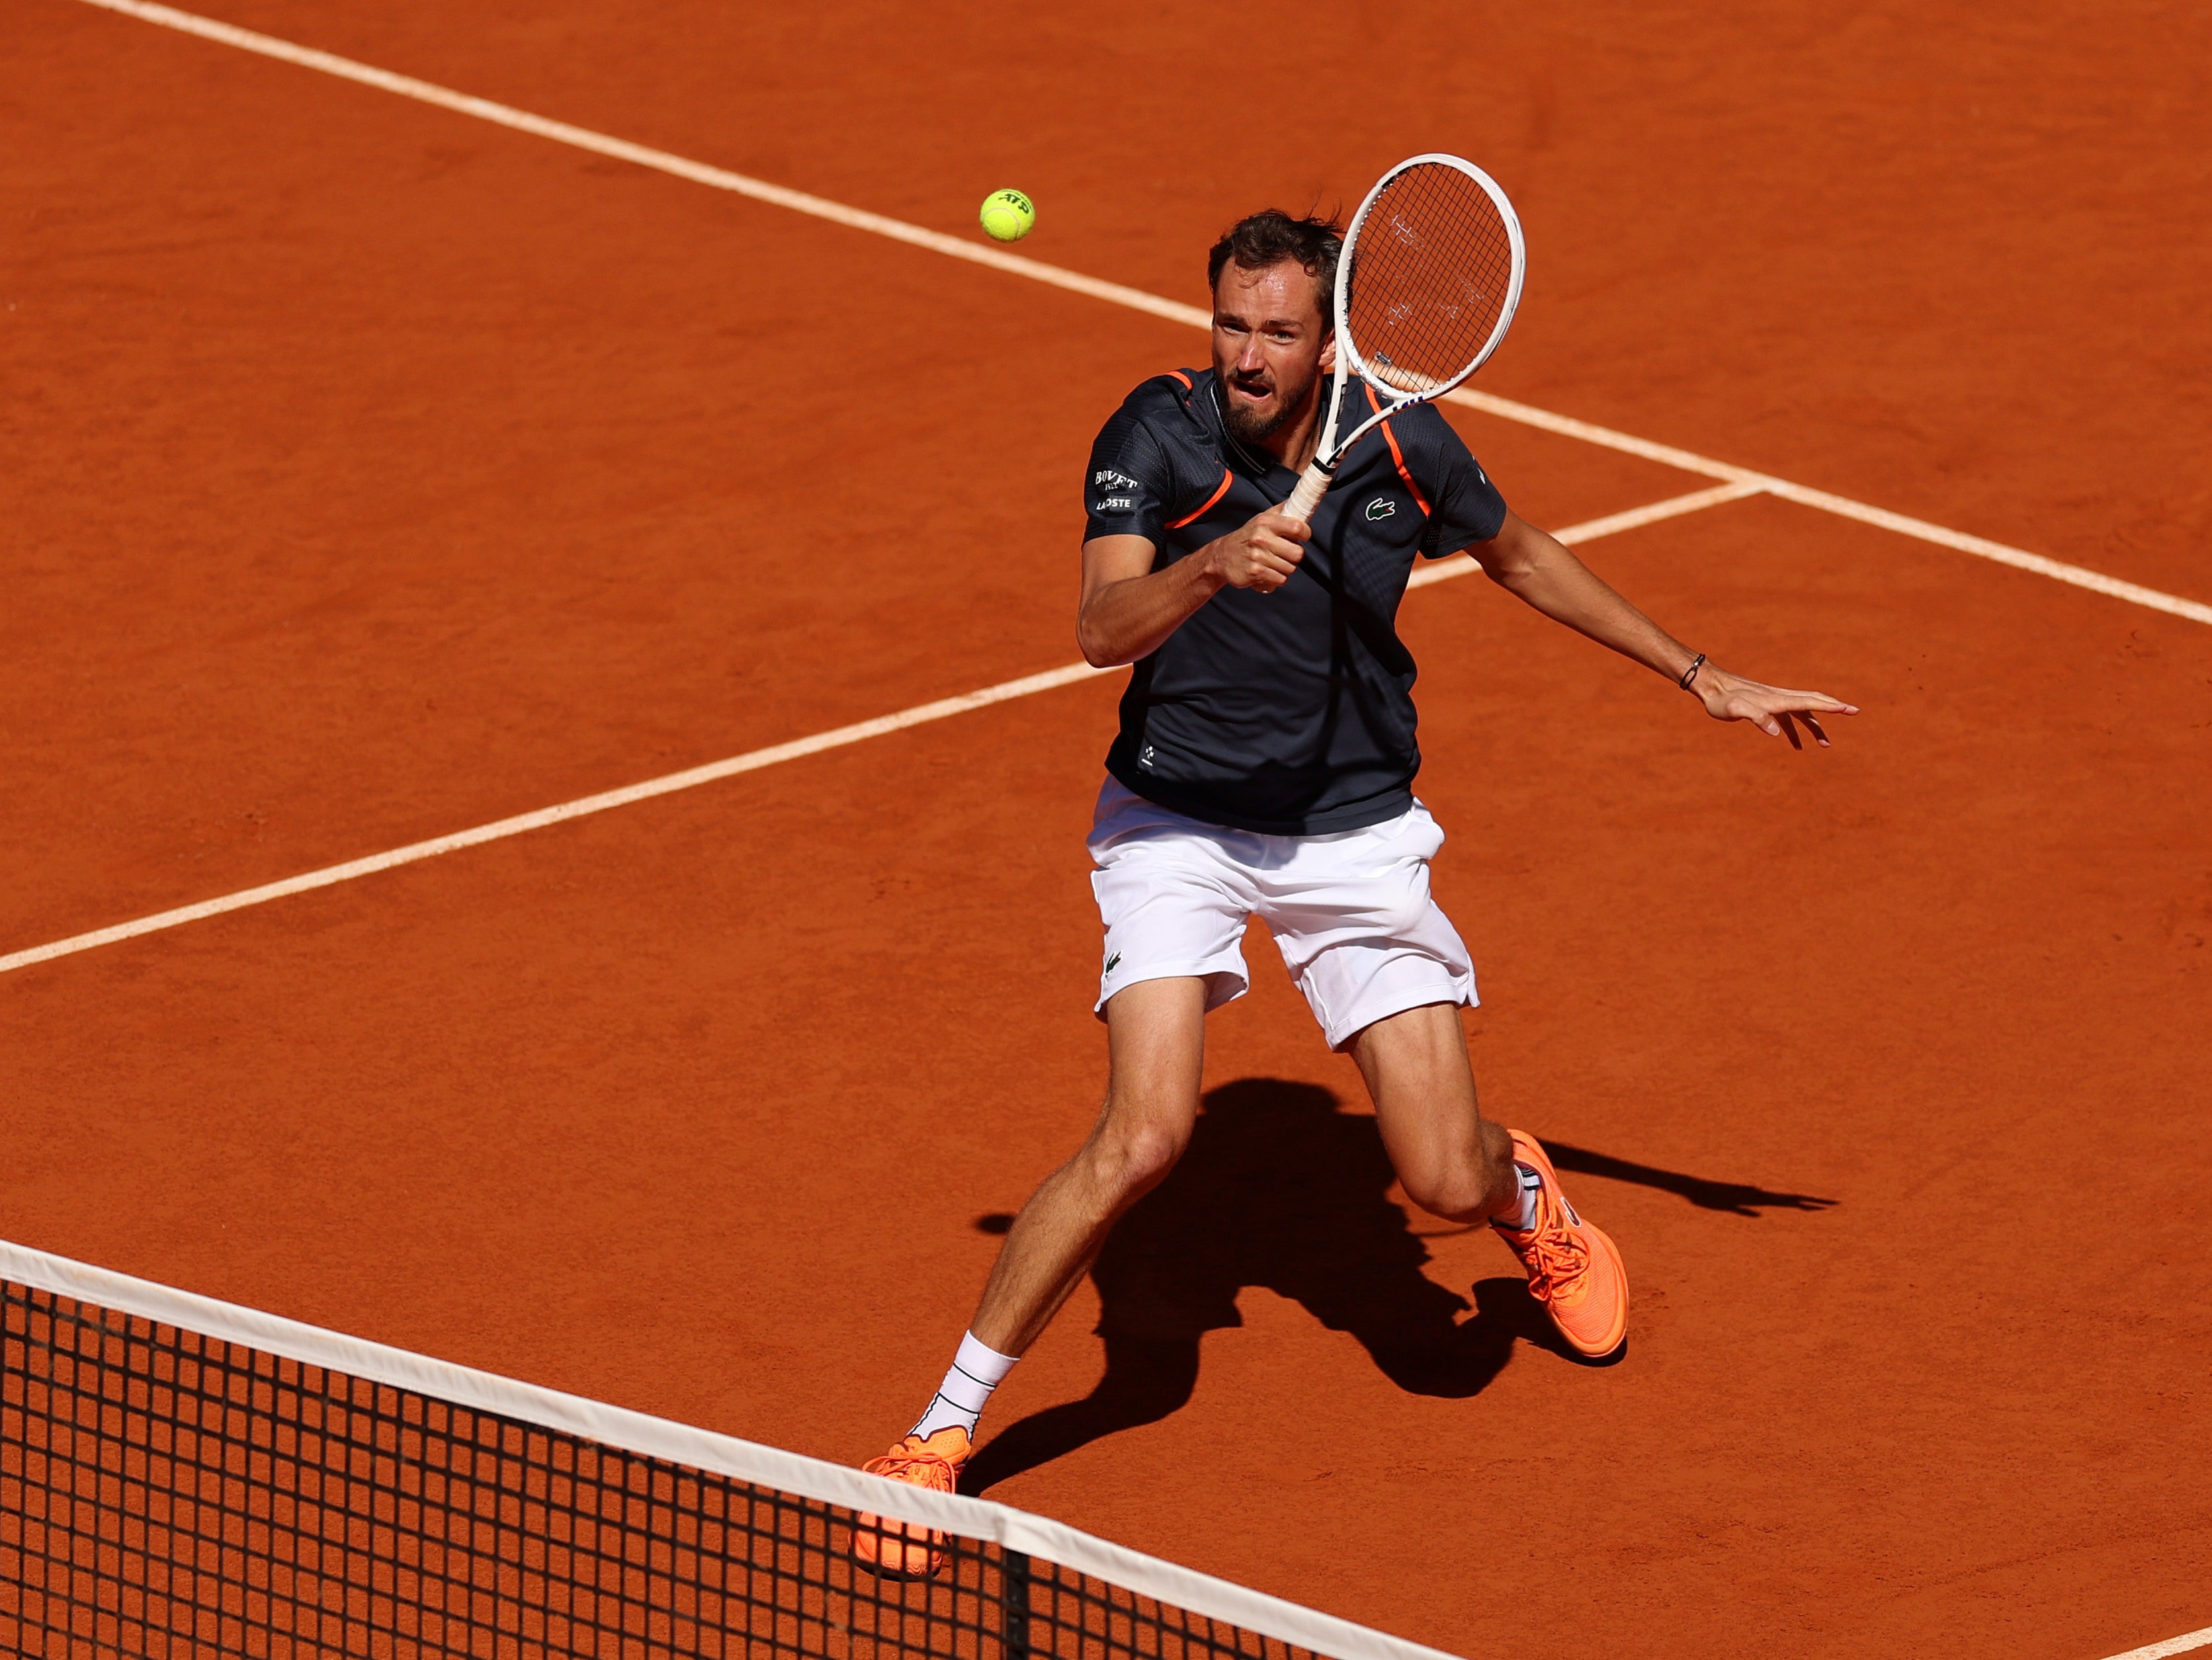 Daniil Medvedev has made tweaks to his approach for this year’s clay court swing